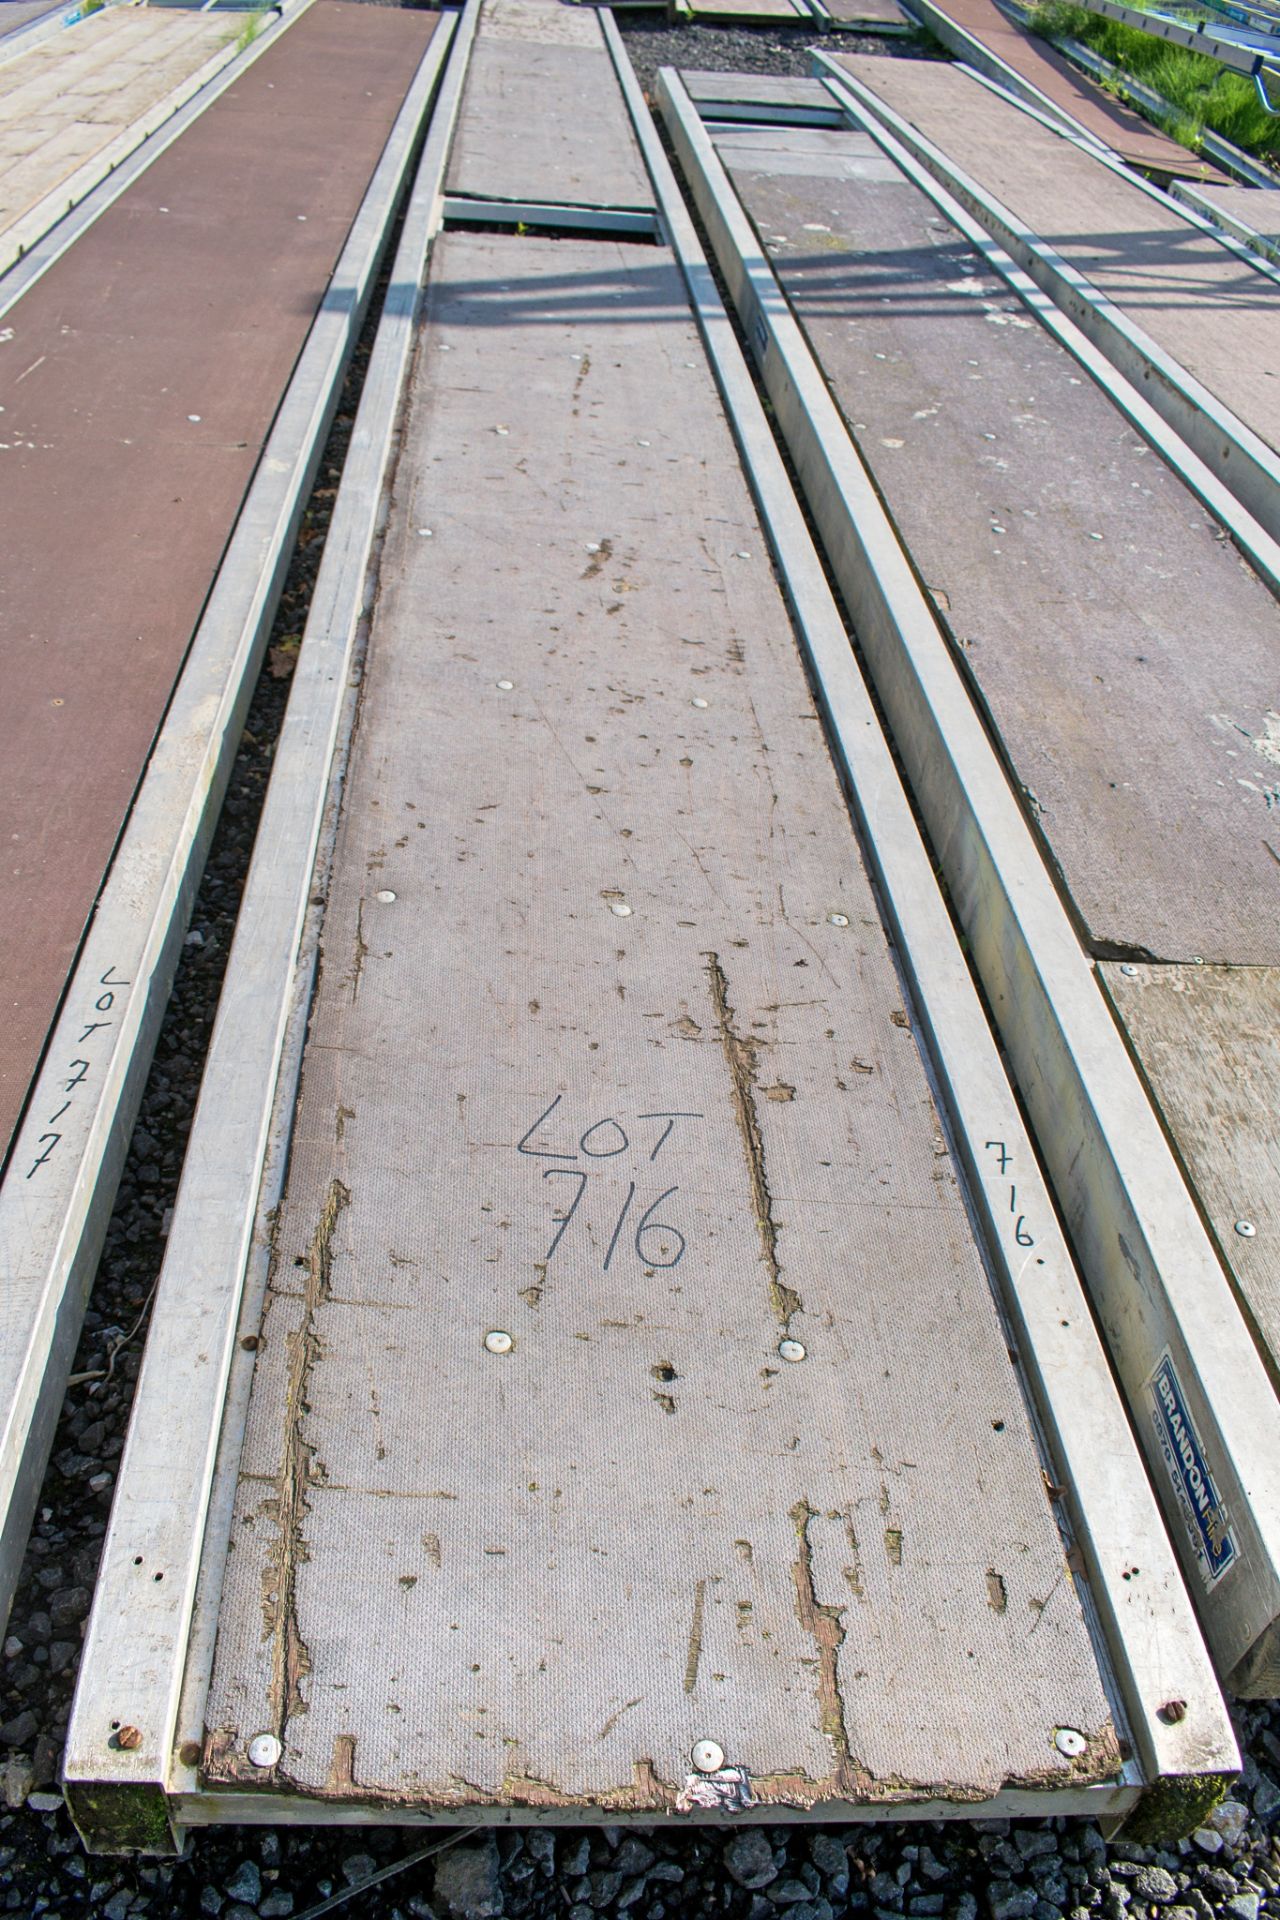 Aluminium staging board approximately 24 ft long